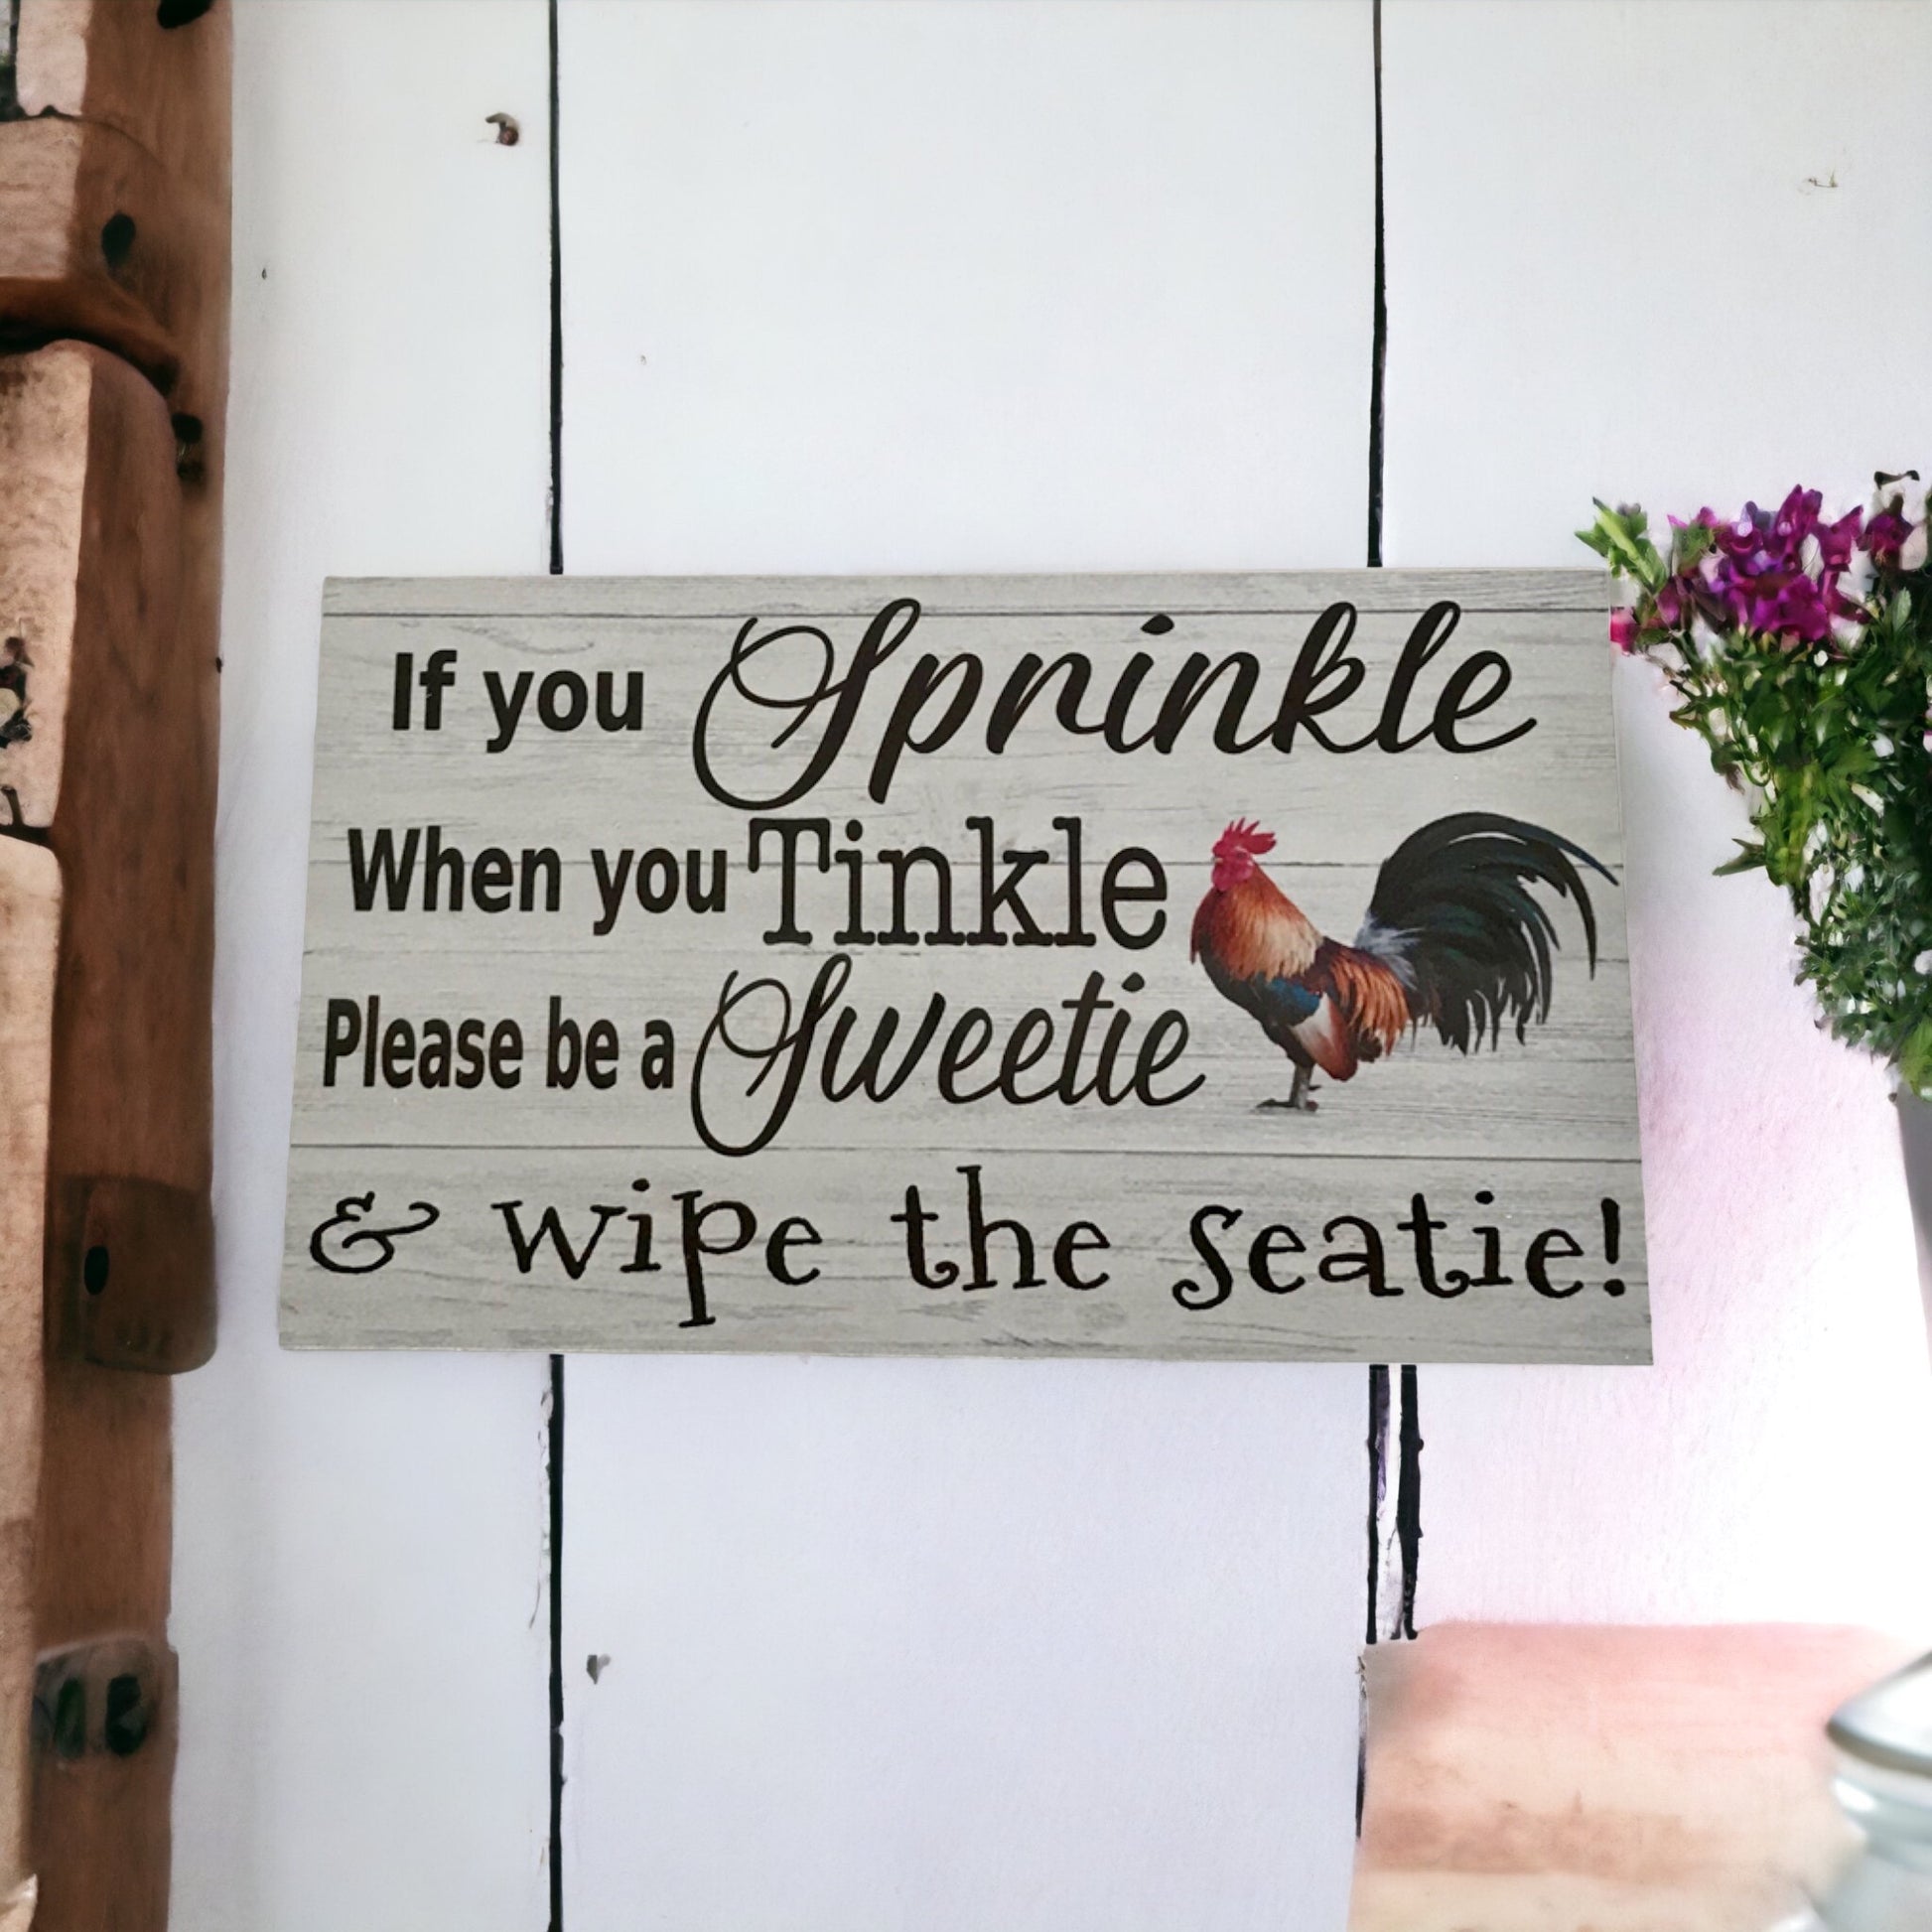 Toilet Sprinkle Tinkle Sweetie Rooster Country Sign - The Renmy Store Homewares & Gifts 